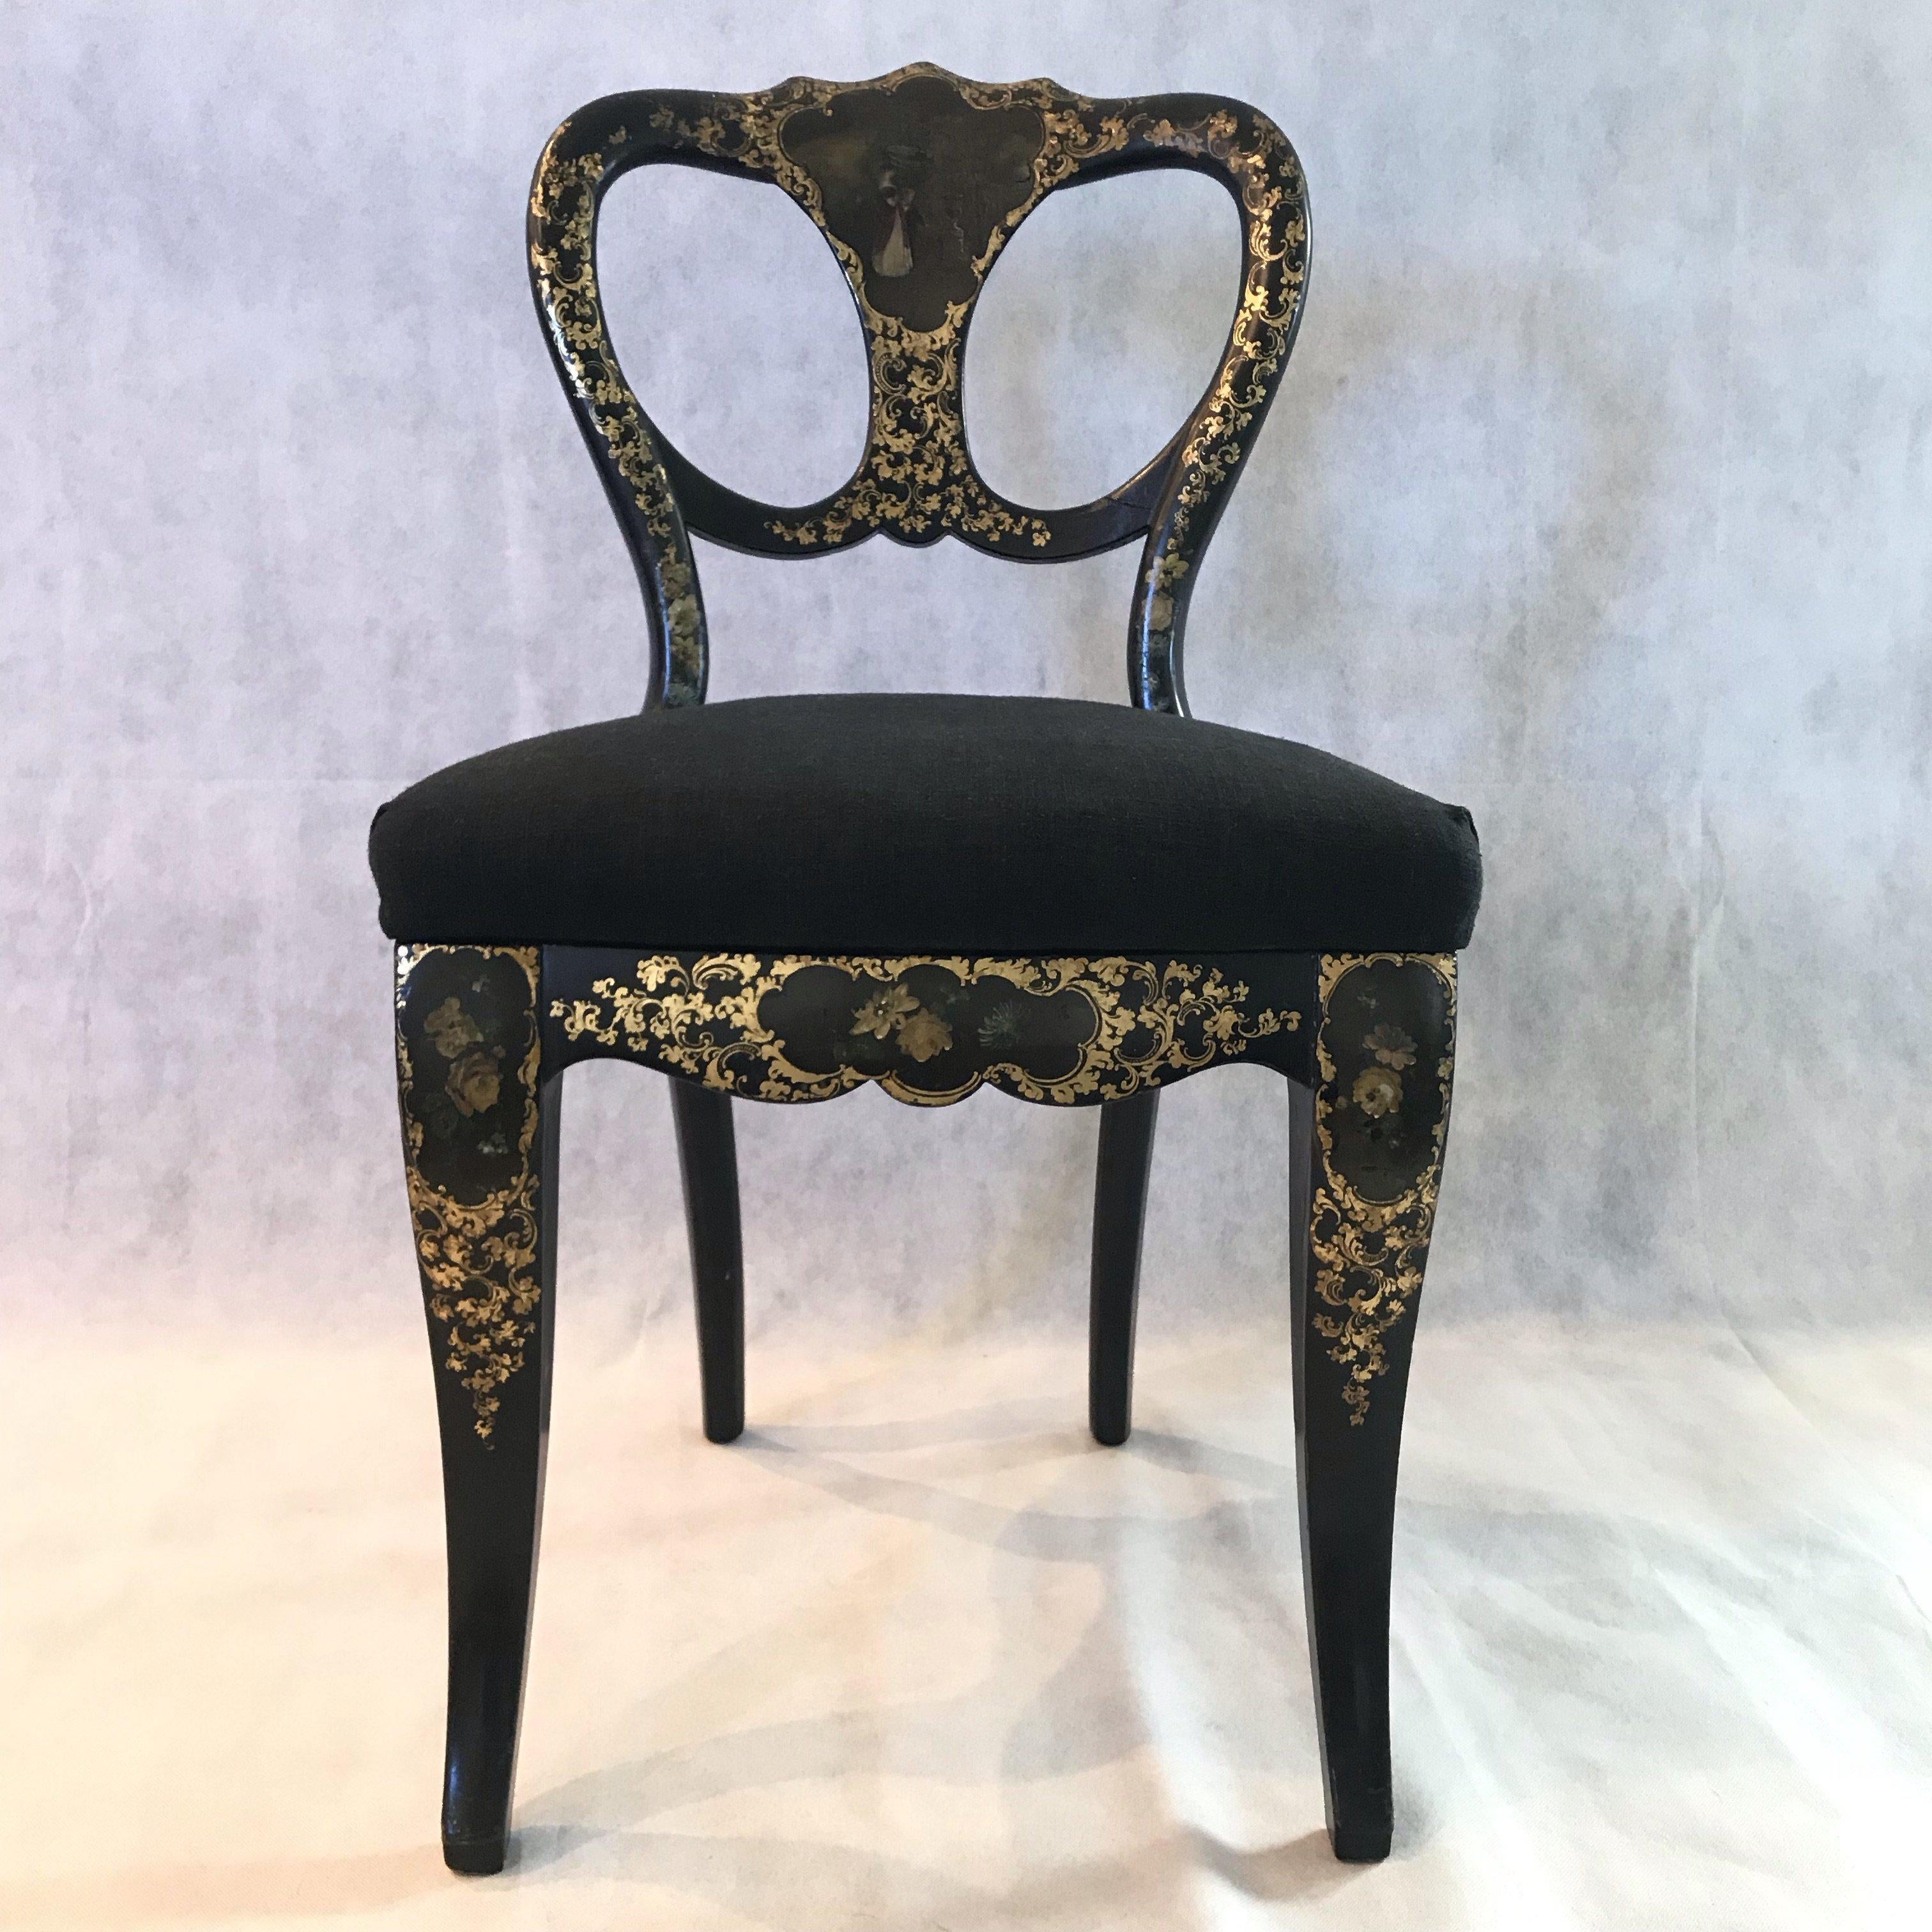 Elegant pair of French 19th century ebony hand painted papier mâché chairs having black backgrounds with intricate fancy gold decoration and newly reupholstered black linen seats. Each back has an original marvelously weathered figural painting.
